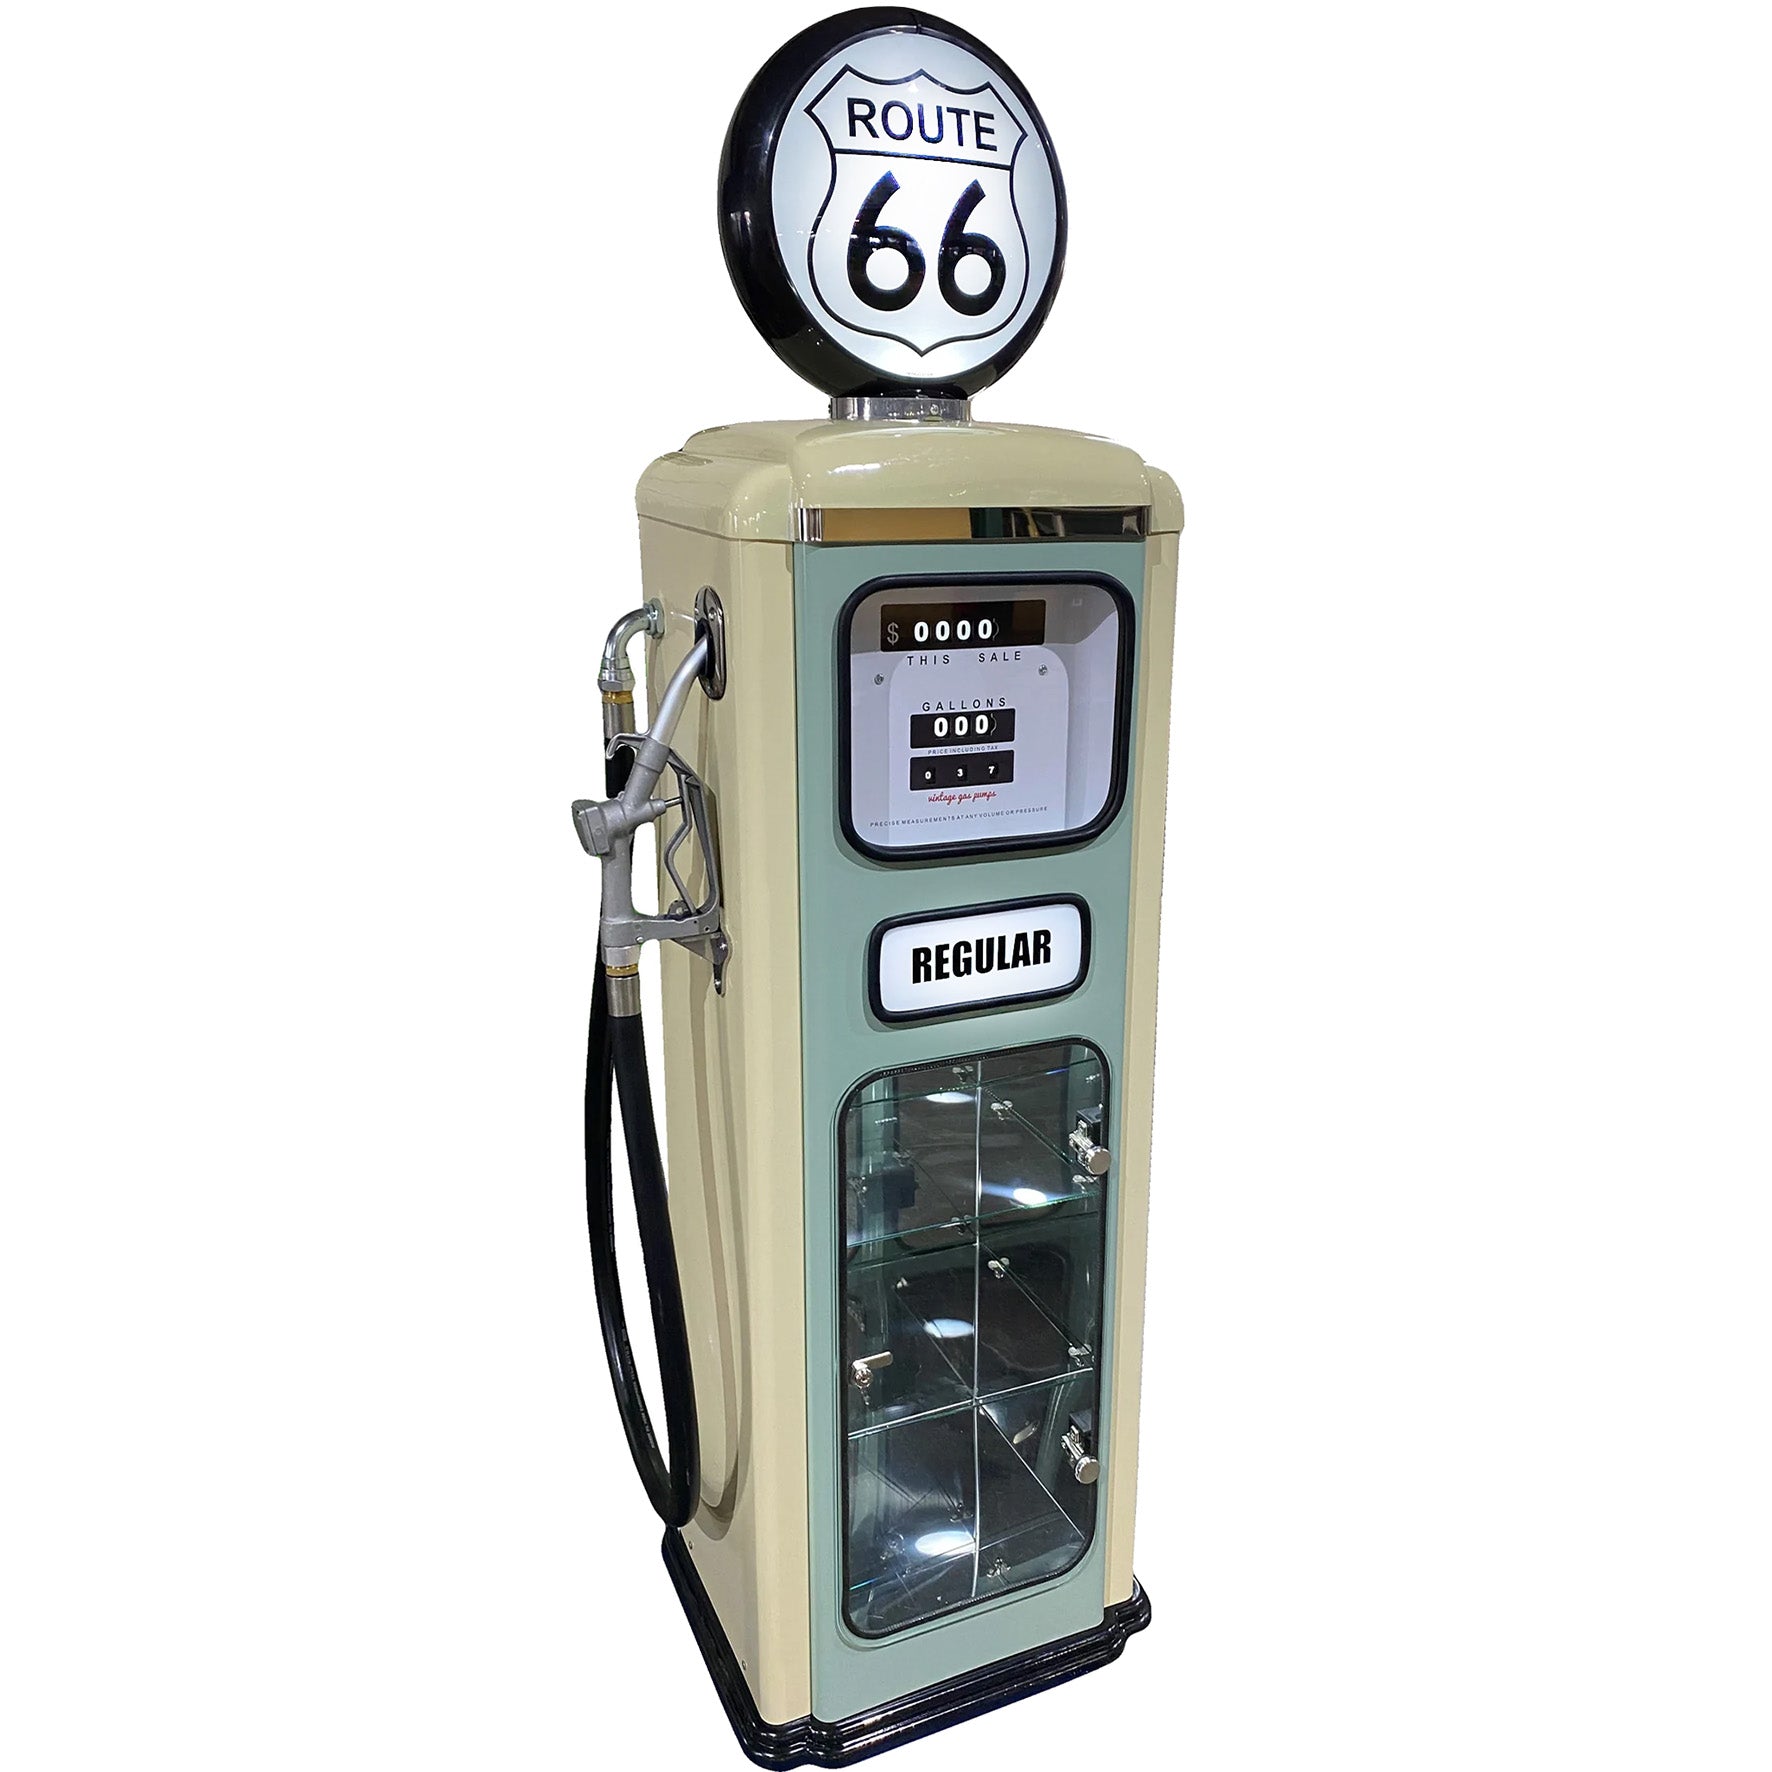 Replica Gas Pump with cabinet